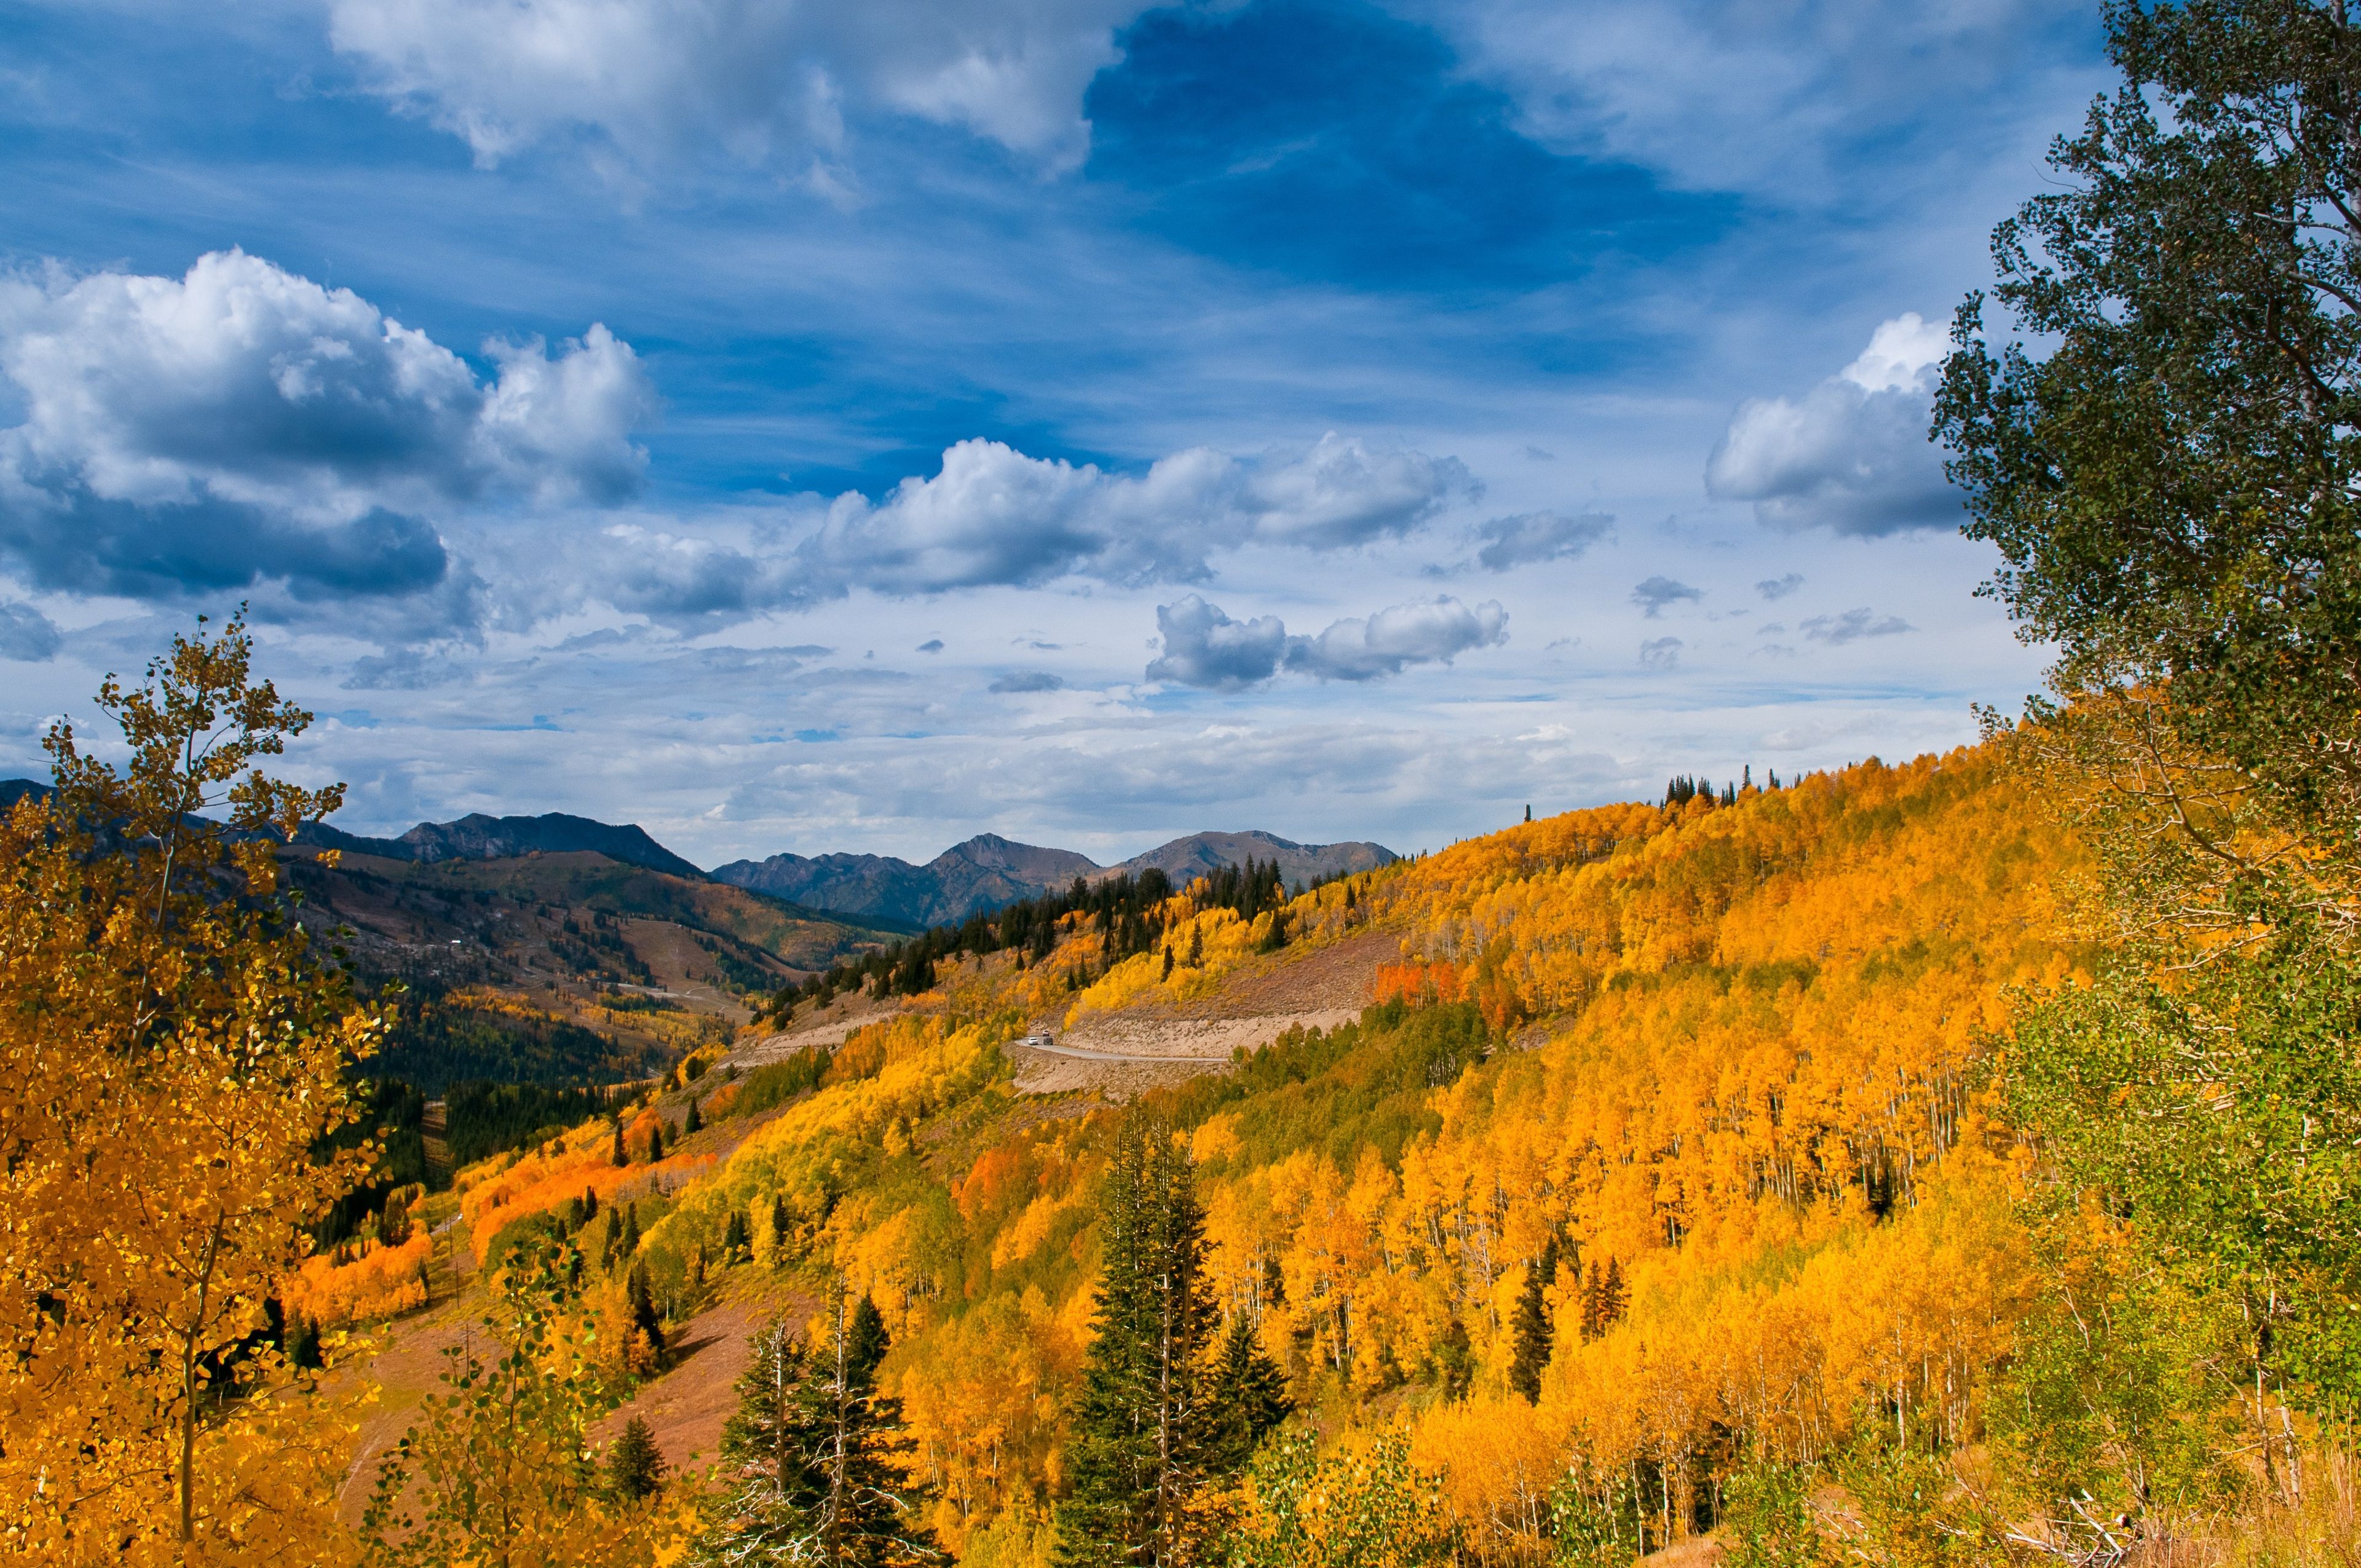 Mountainside scenery of yellow trees, with a blue sky and clouds above.